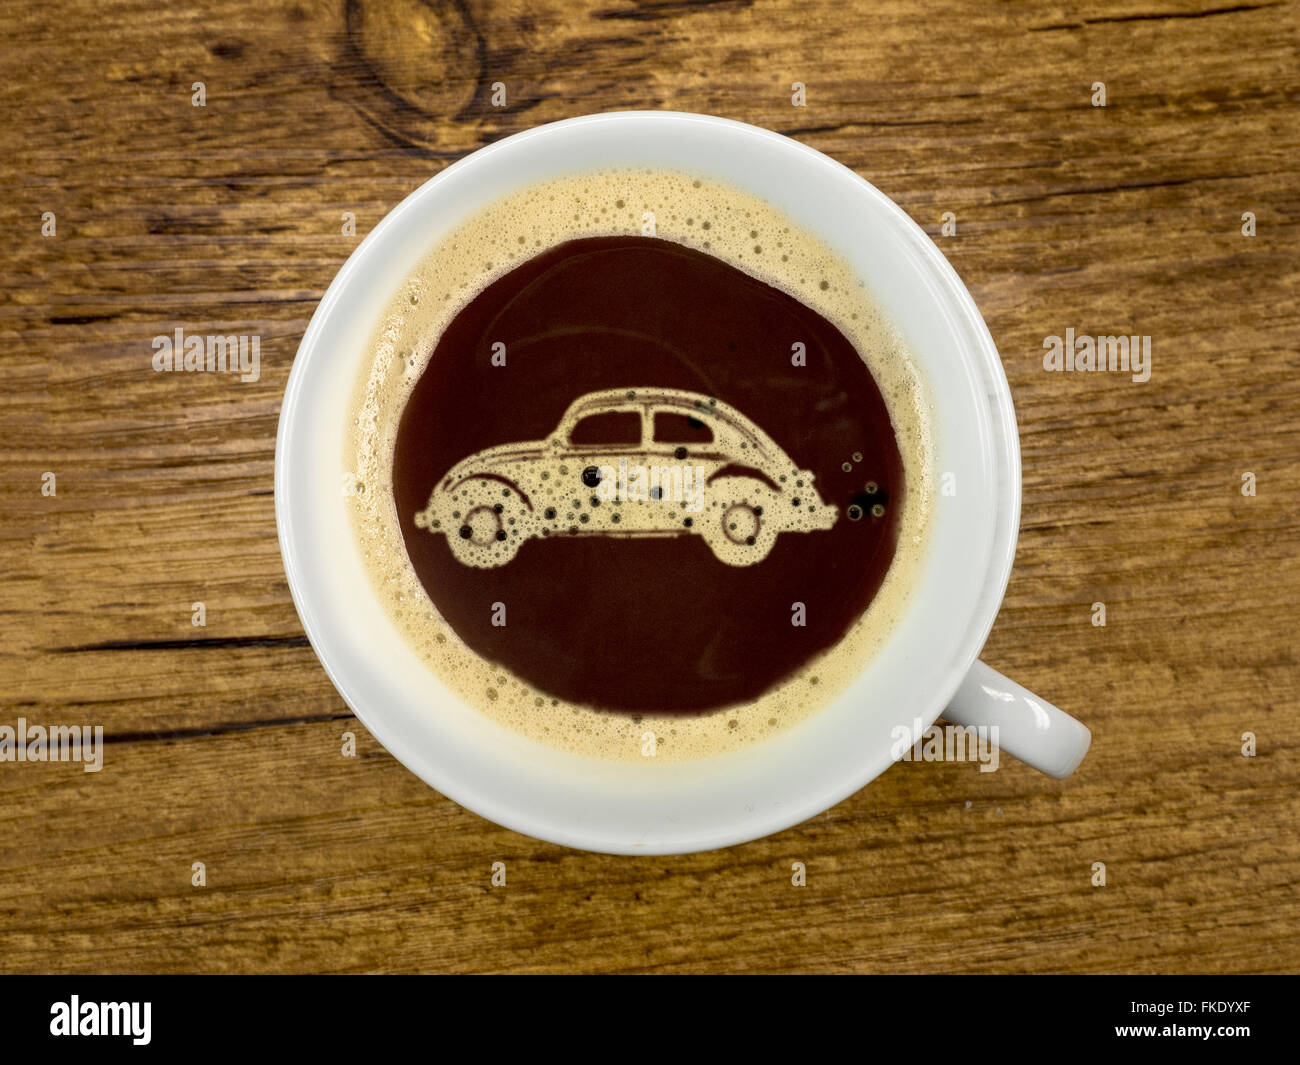 Car repair and coffee service Stock Photo